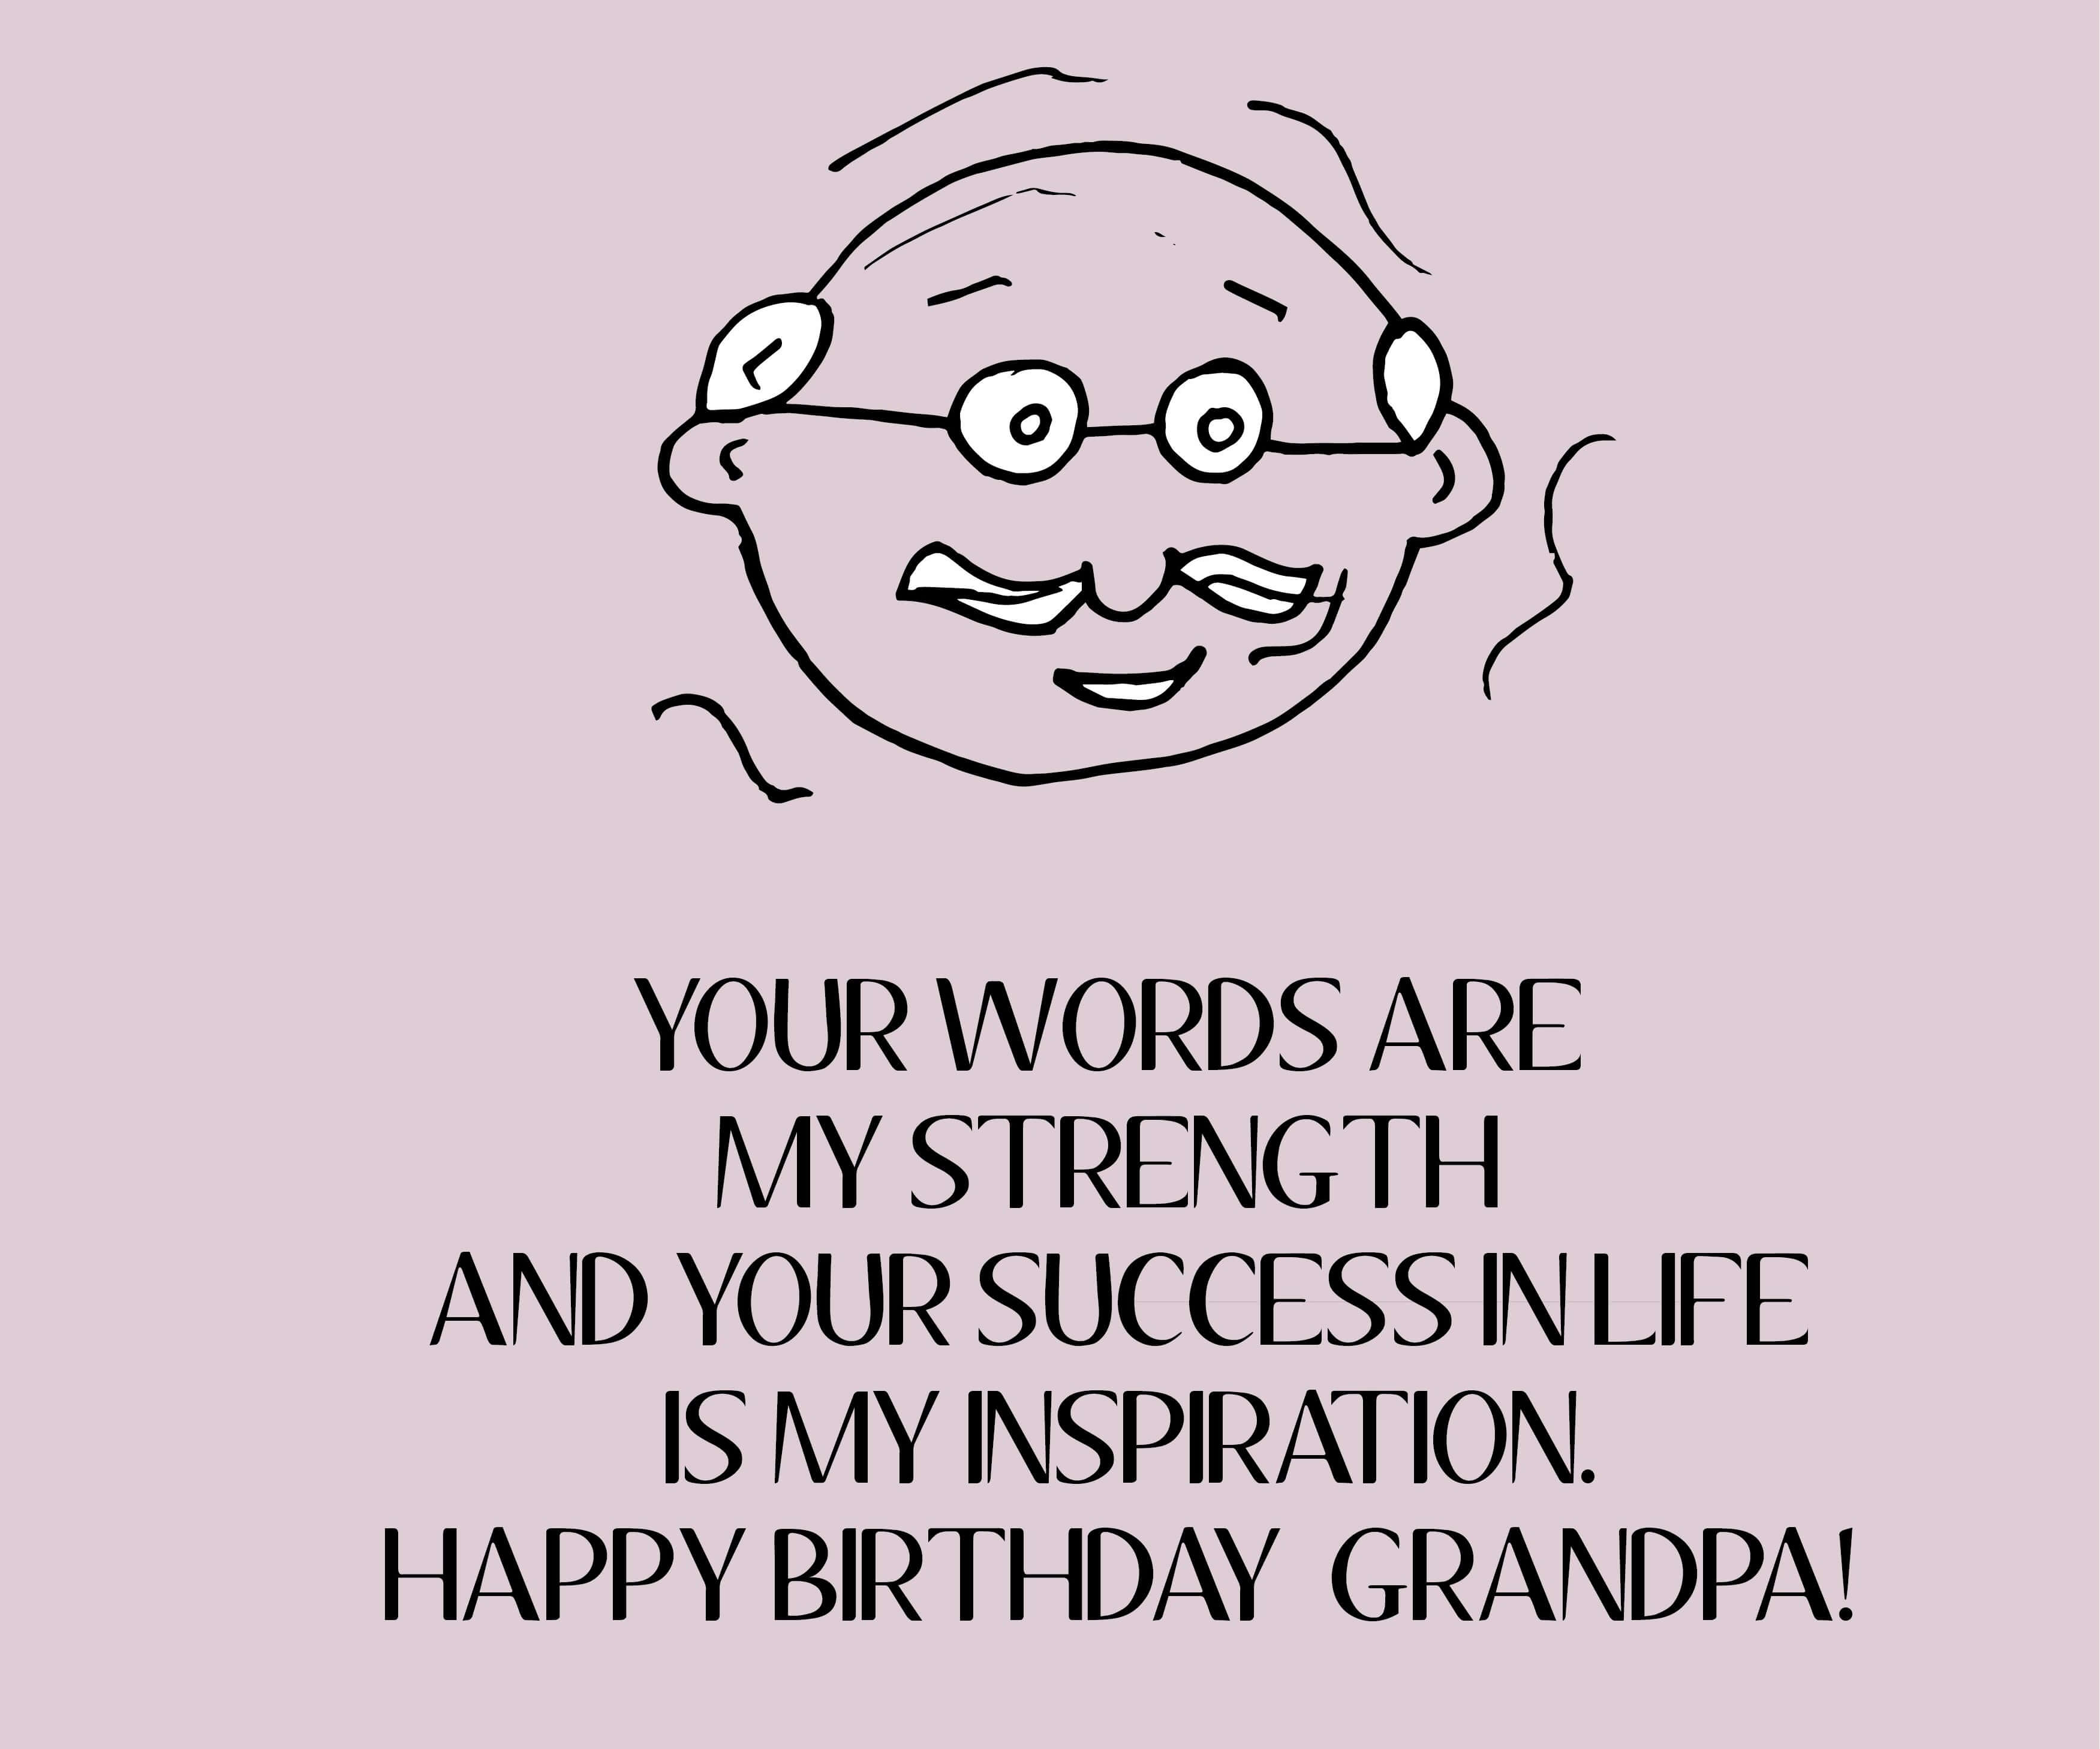 Download 50 Happy Birthday Wishes For Grandfather Cake Images Quotes Messages Greeting Cards The Birthday Wishes